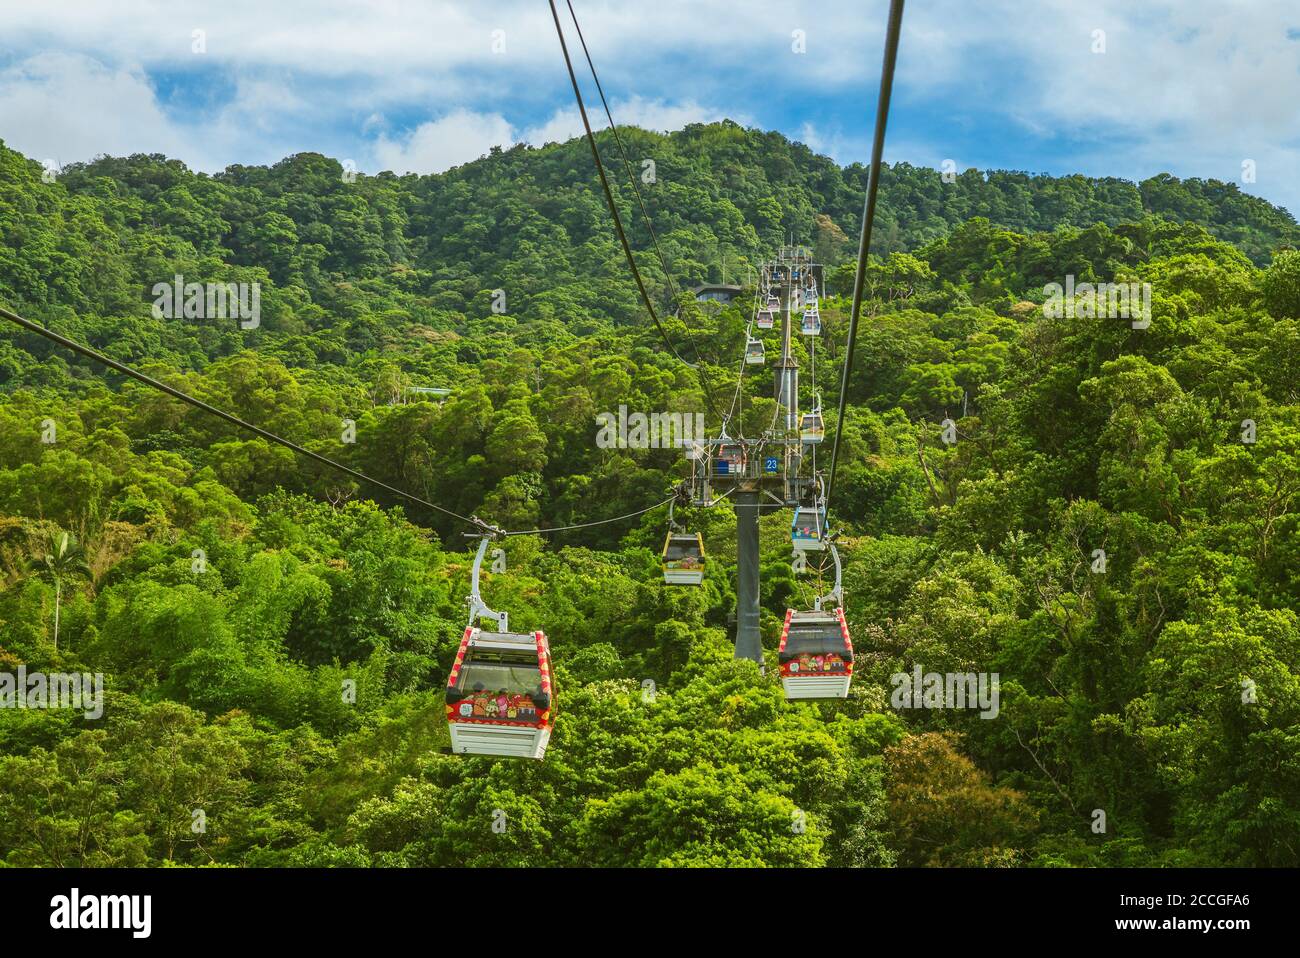 August 18, 2020: Maokong Gondola, a gondola lift transportation system in Taipei, Taiwan. It was opened on 4 July 2007 and operates between Taipei Zoo Stock Photo